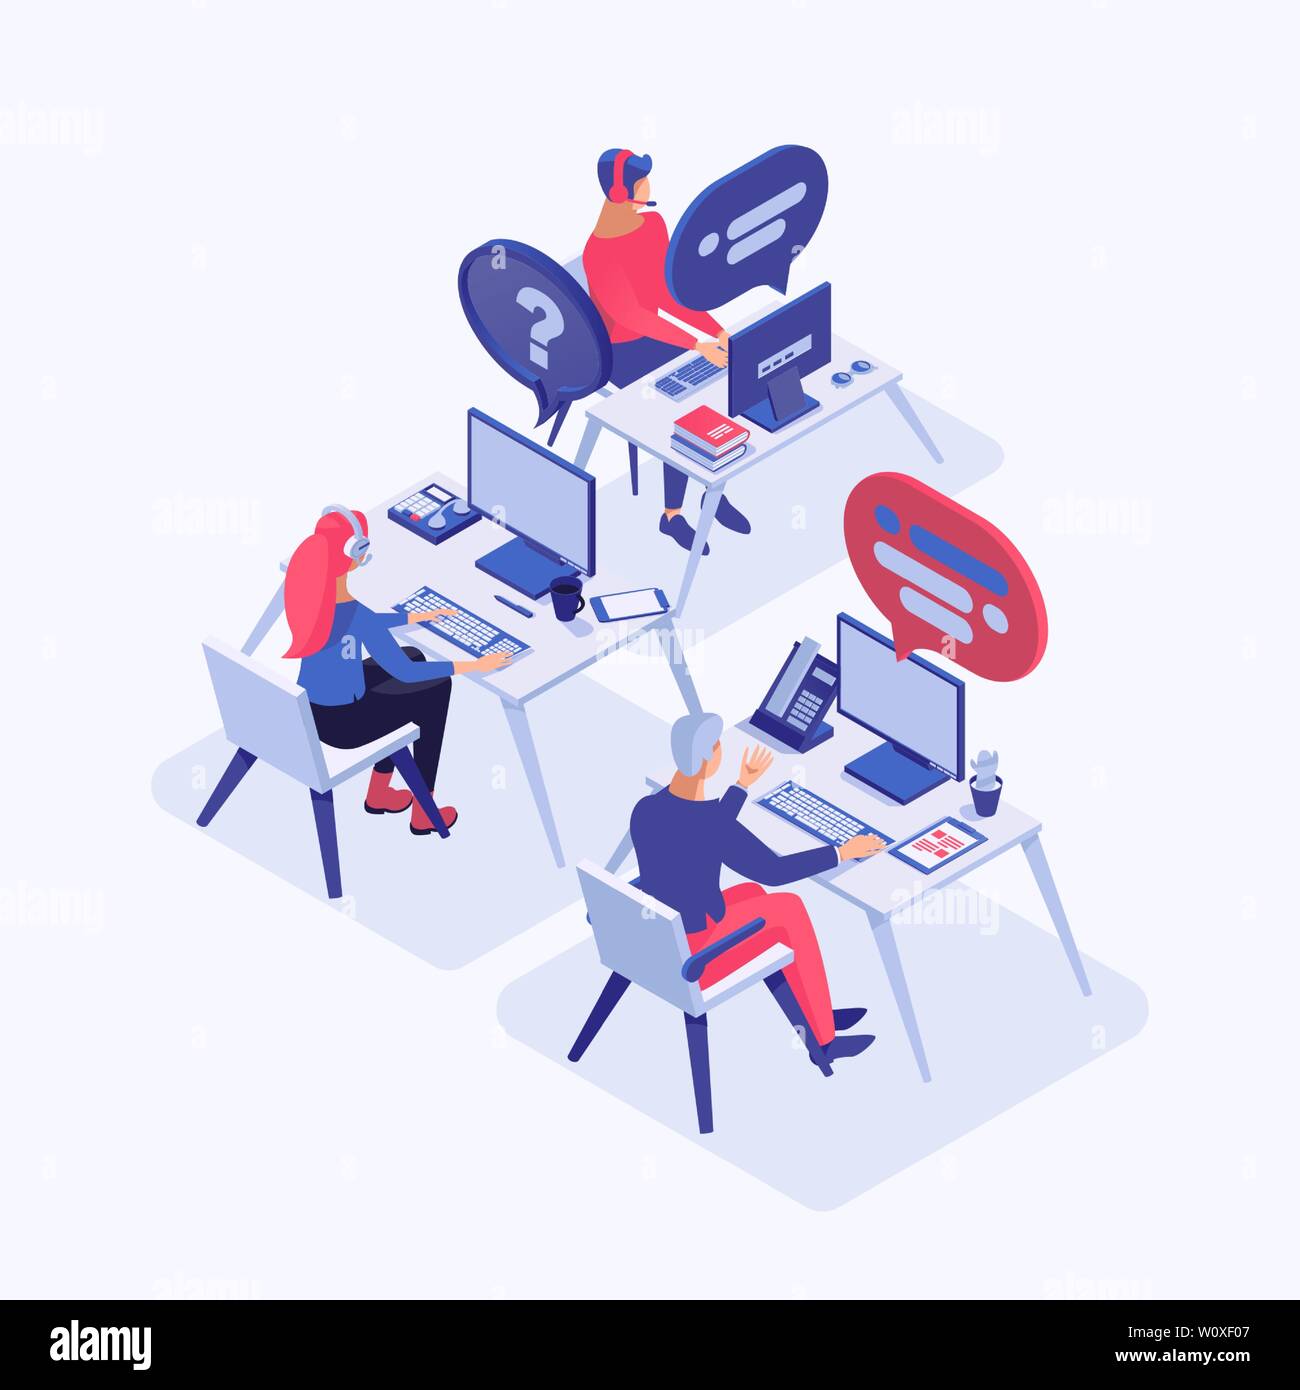 Call center vector isometric illustration. Customer service operators with headset consulting clients, managers 3d cartoon characters. All-day tech support, office workers at workplace Stock Vector